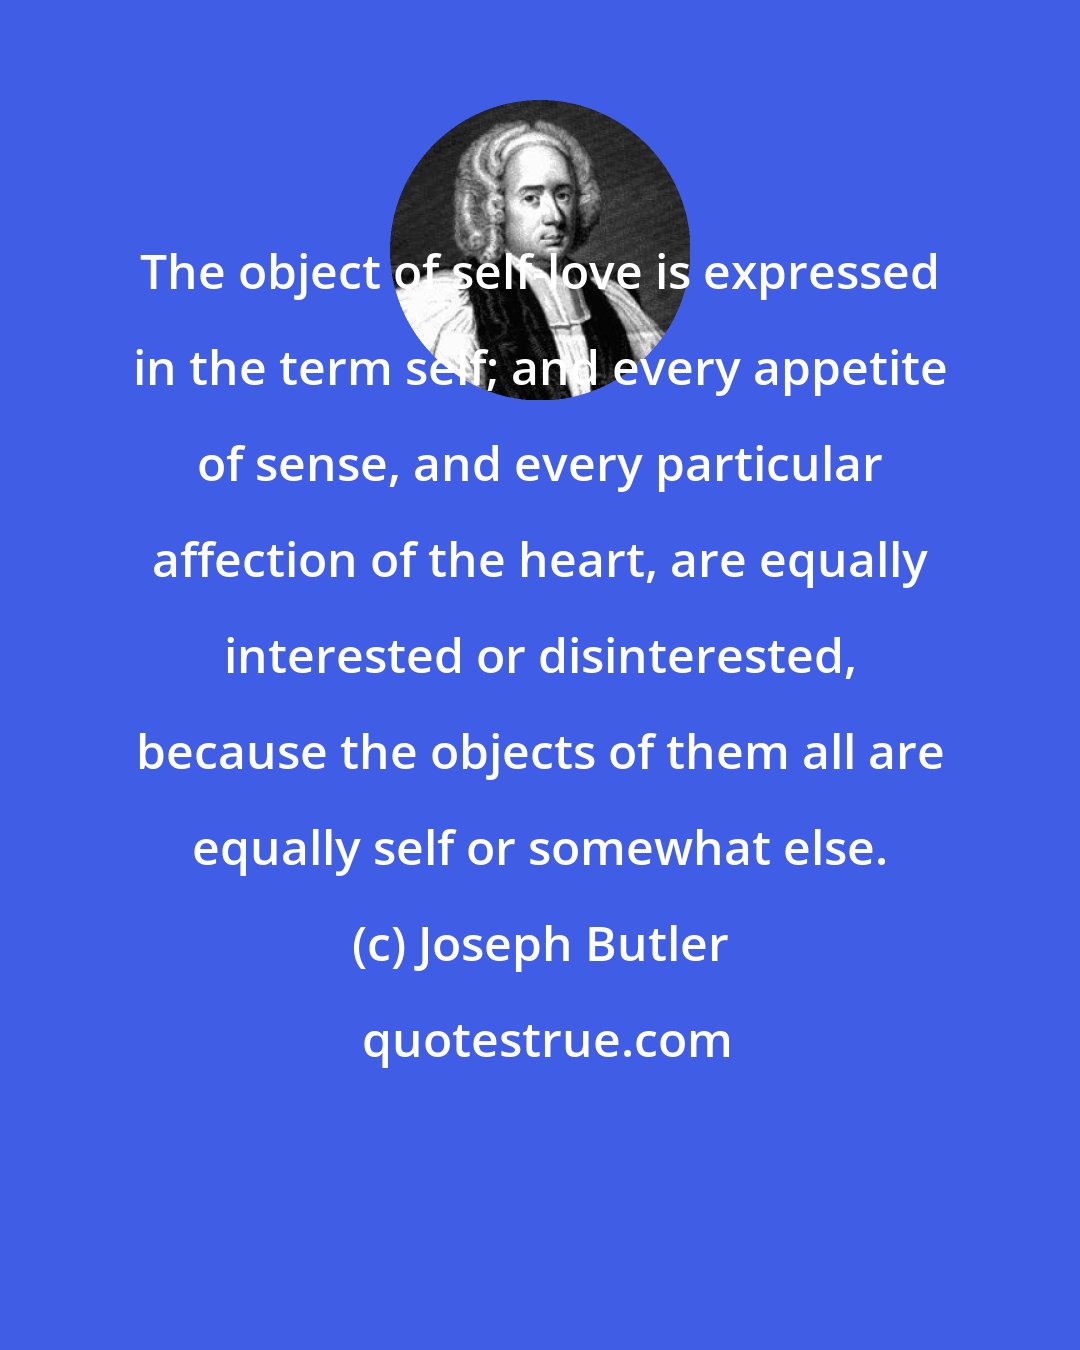 Joseph Butler: The object of self-love is expressed in the term self; and every appetite of sense, and every particular affection of the heart, are equally interested or disinterested, because the objects of them all are equally self or somewhat else.